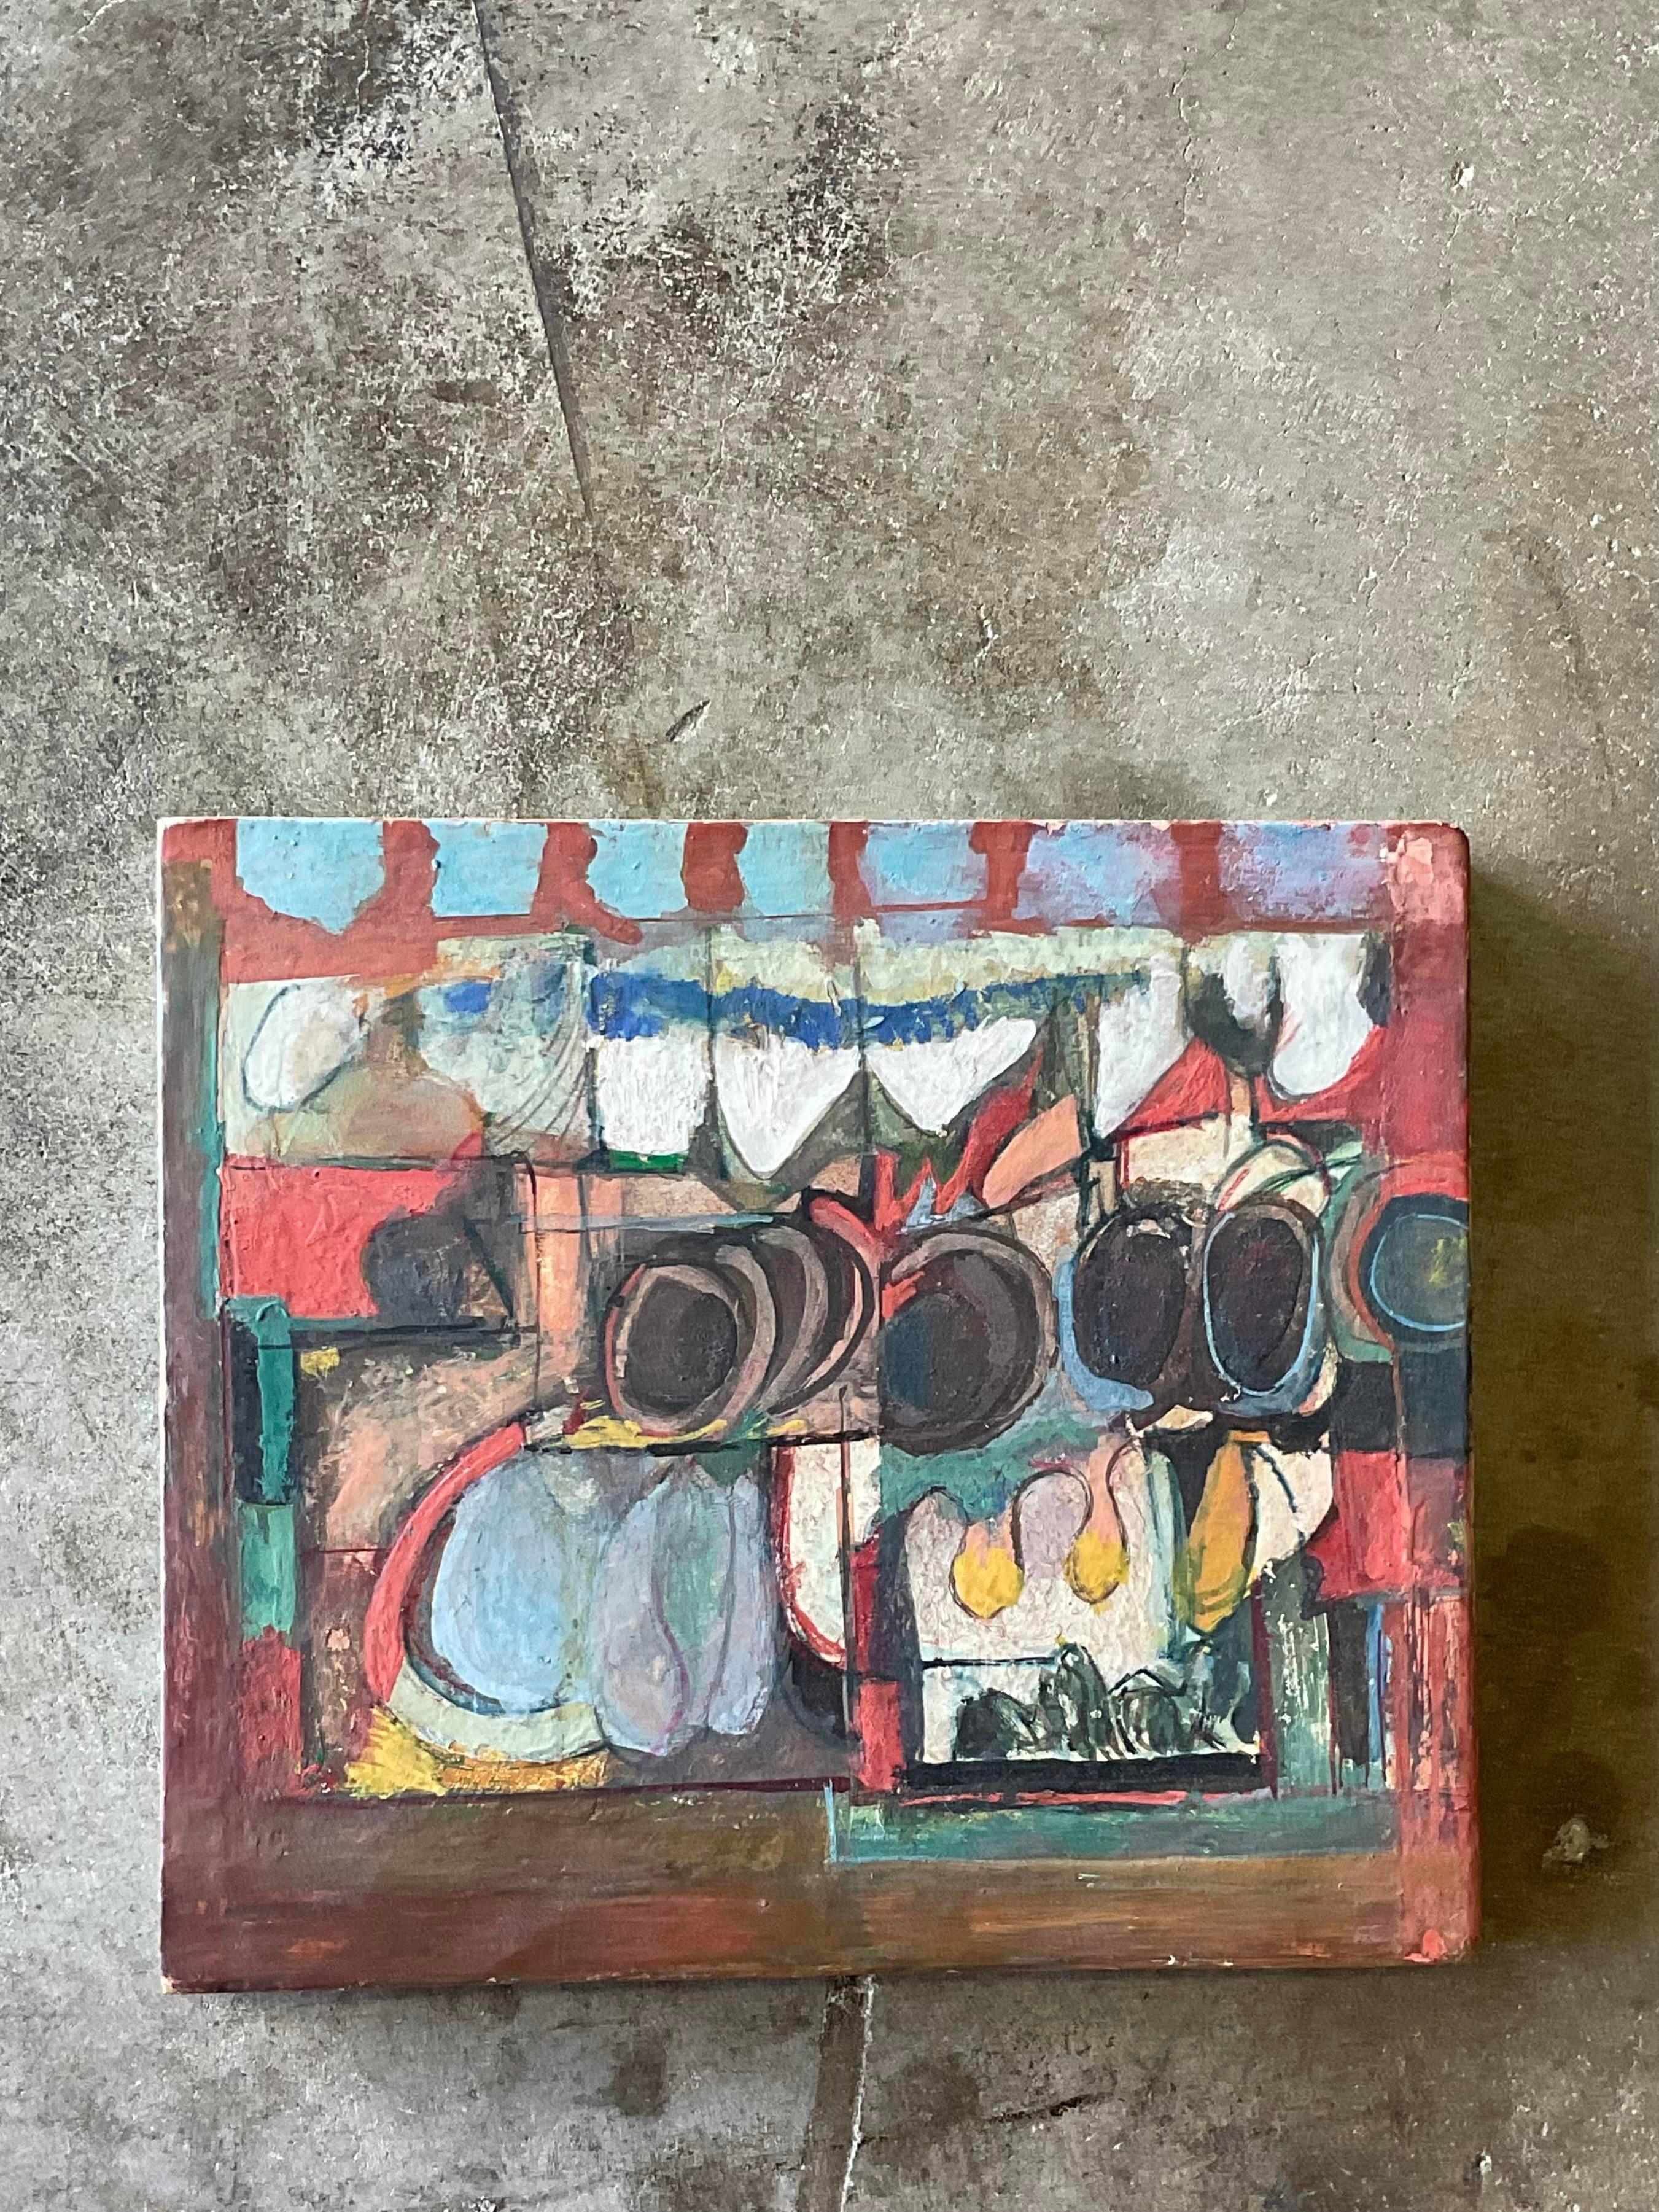 Fantastic vintage abstract original oil. A brilliantly colored composition on wood. Signed and dated by the artist Jack Hammack, 1967. Acquired from a Portland estate